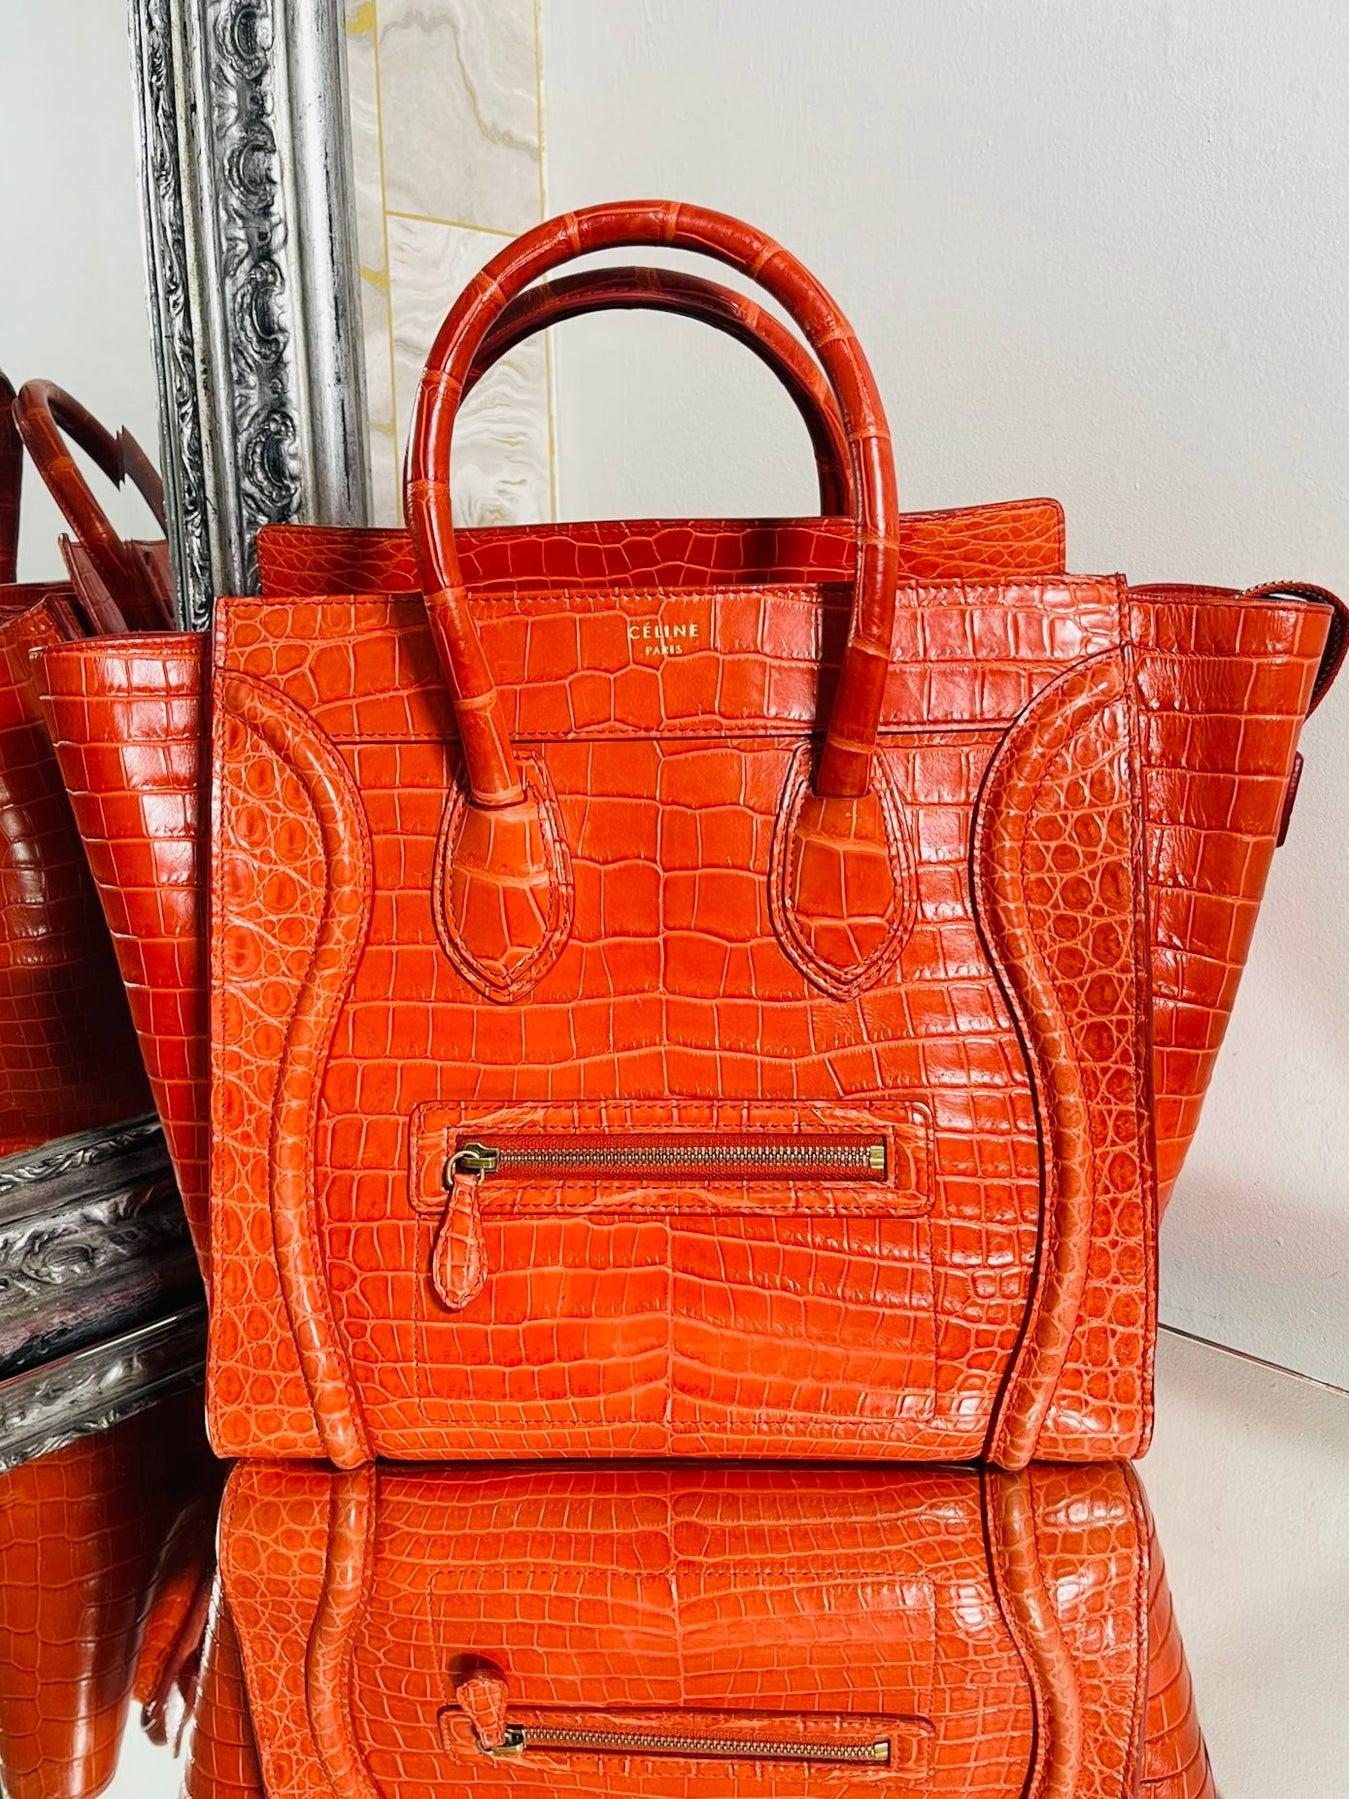 Celine Crocodile Skin Luggage Bag

Orange shiny Crocodile skin with gold hardware. Luxury tote bag with sturdy top carry handles and detailed stitching. Leather interior.

Additional information:
Size – 39 W x 13 D x 28 H cm
Composition- Crocodile